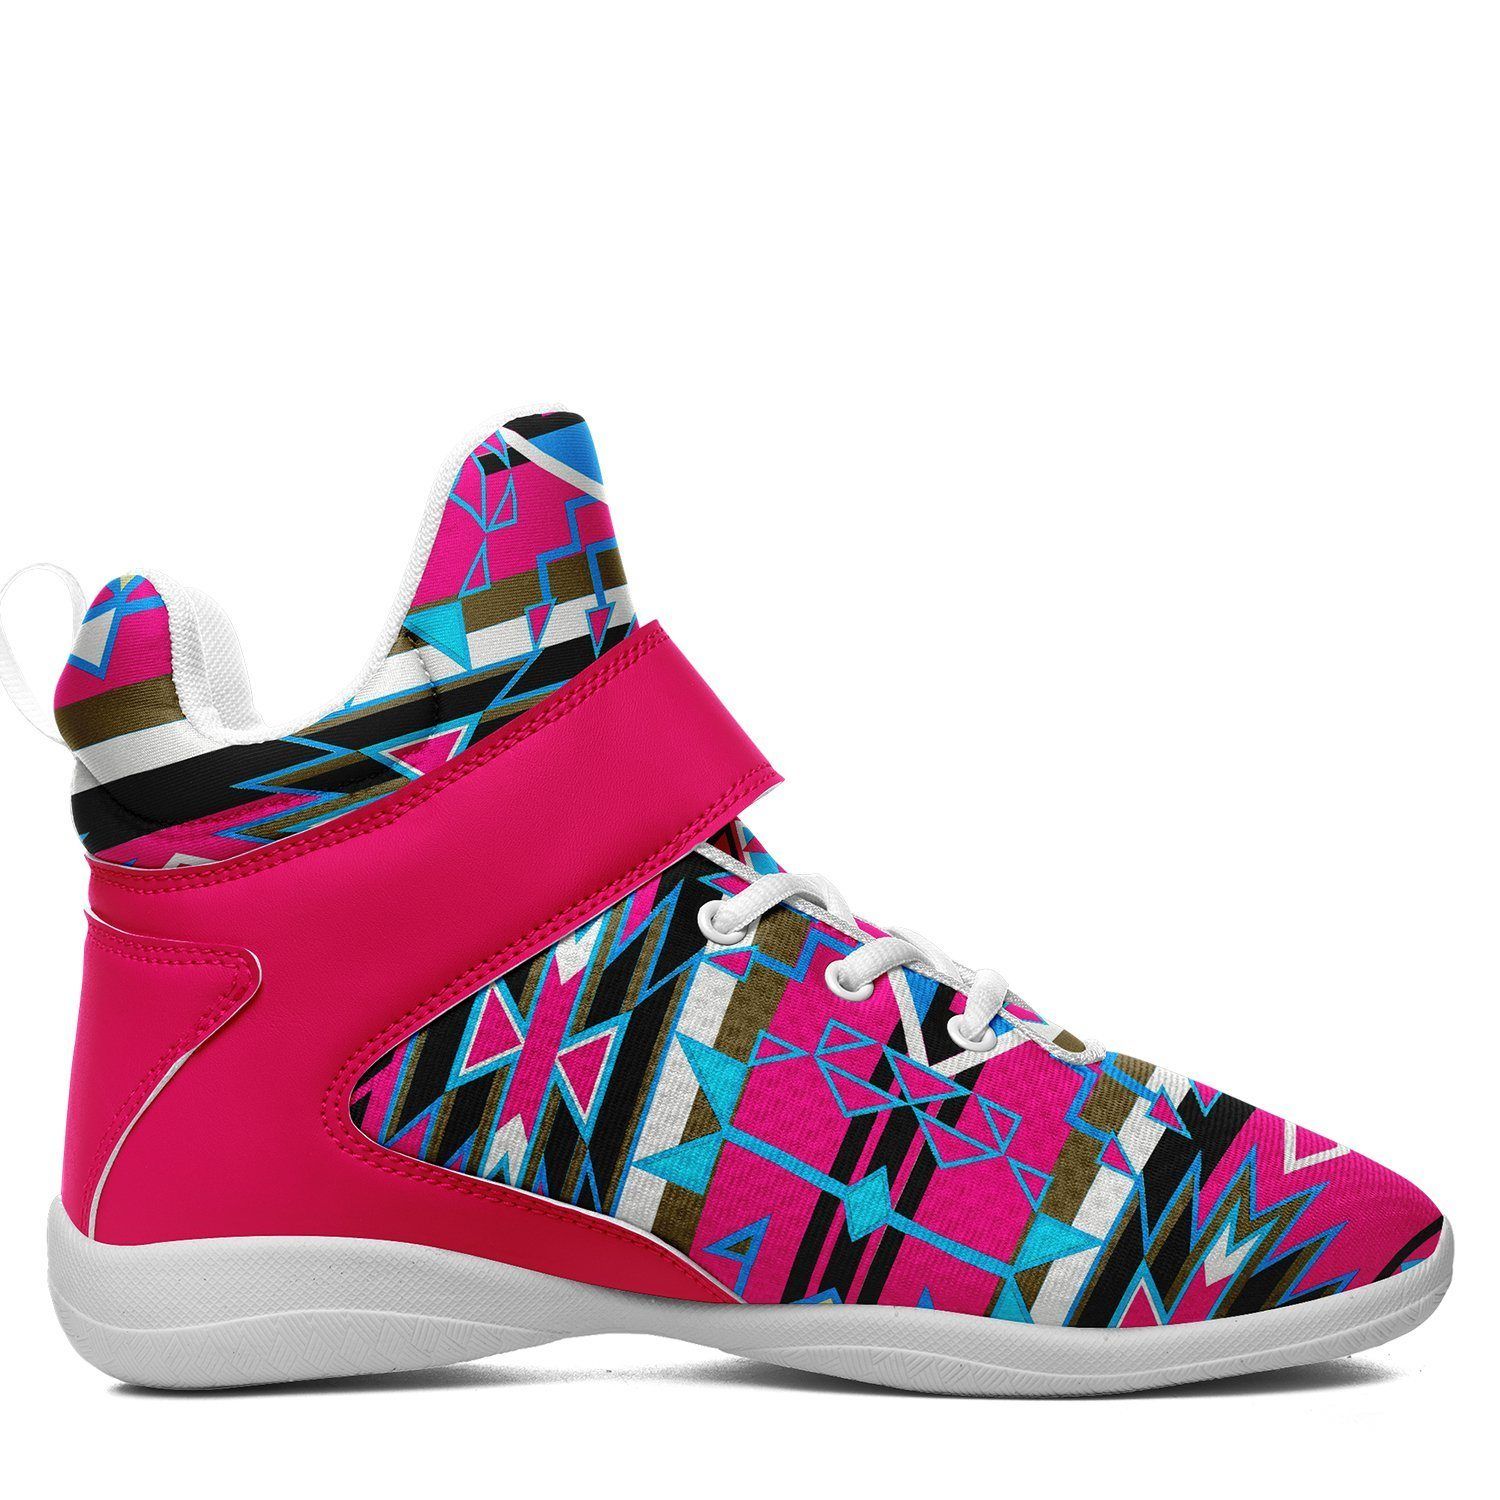 Force of Nature Sunset Storm Kid's Ipottaa Basketball / Sport High Top Shoes 49 Dzine 